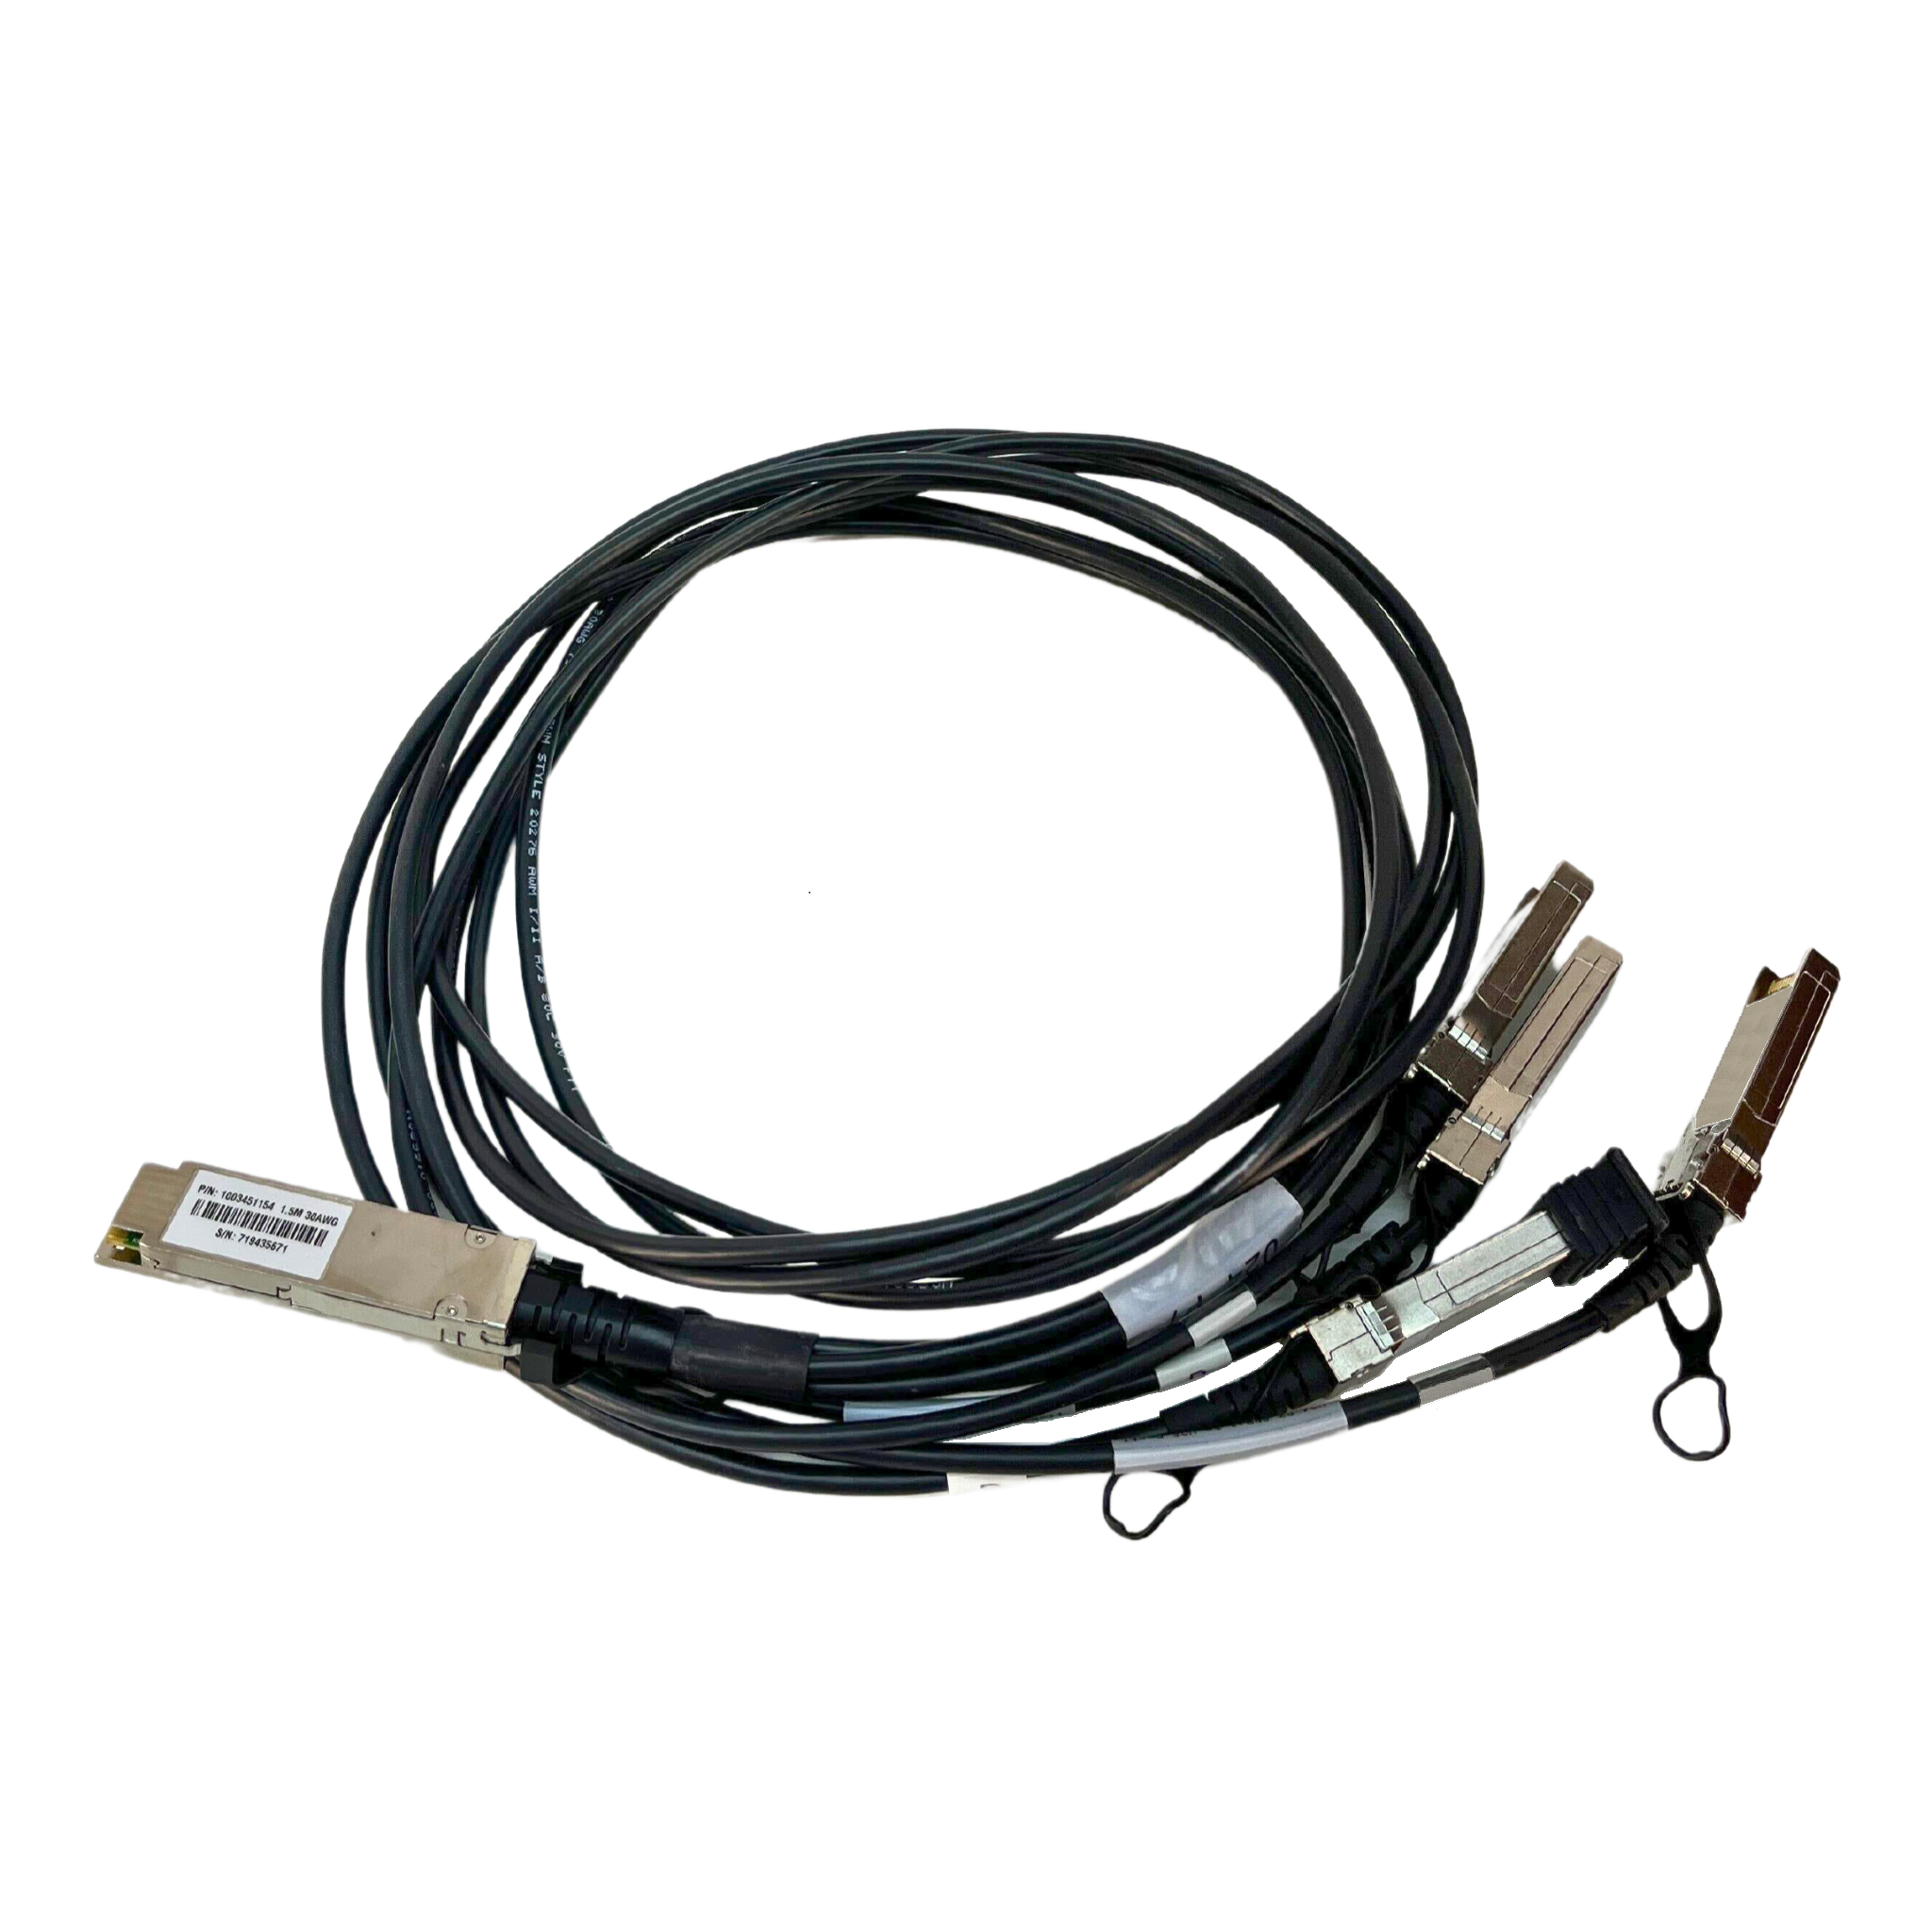 zQSFP+-to-4 zSFP+ Passive Cable Assembly with Dust Cap, 100 Gbps-to-(4) 25 Gbps, Belden Cable, 30 AWG, 1.5m Length